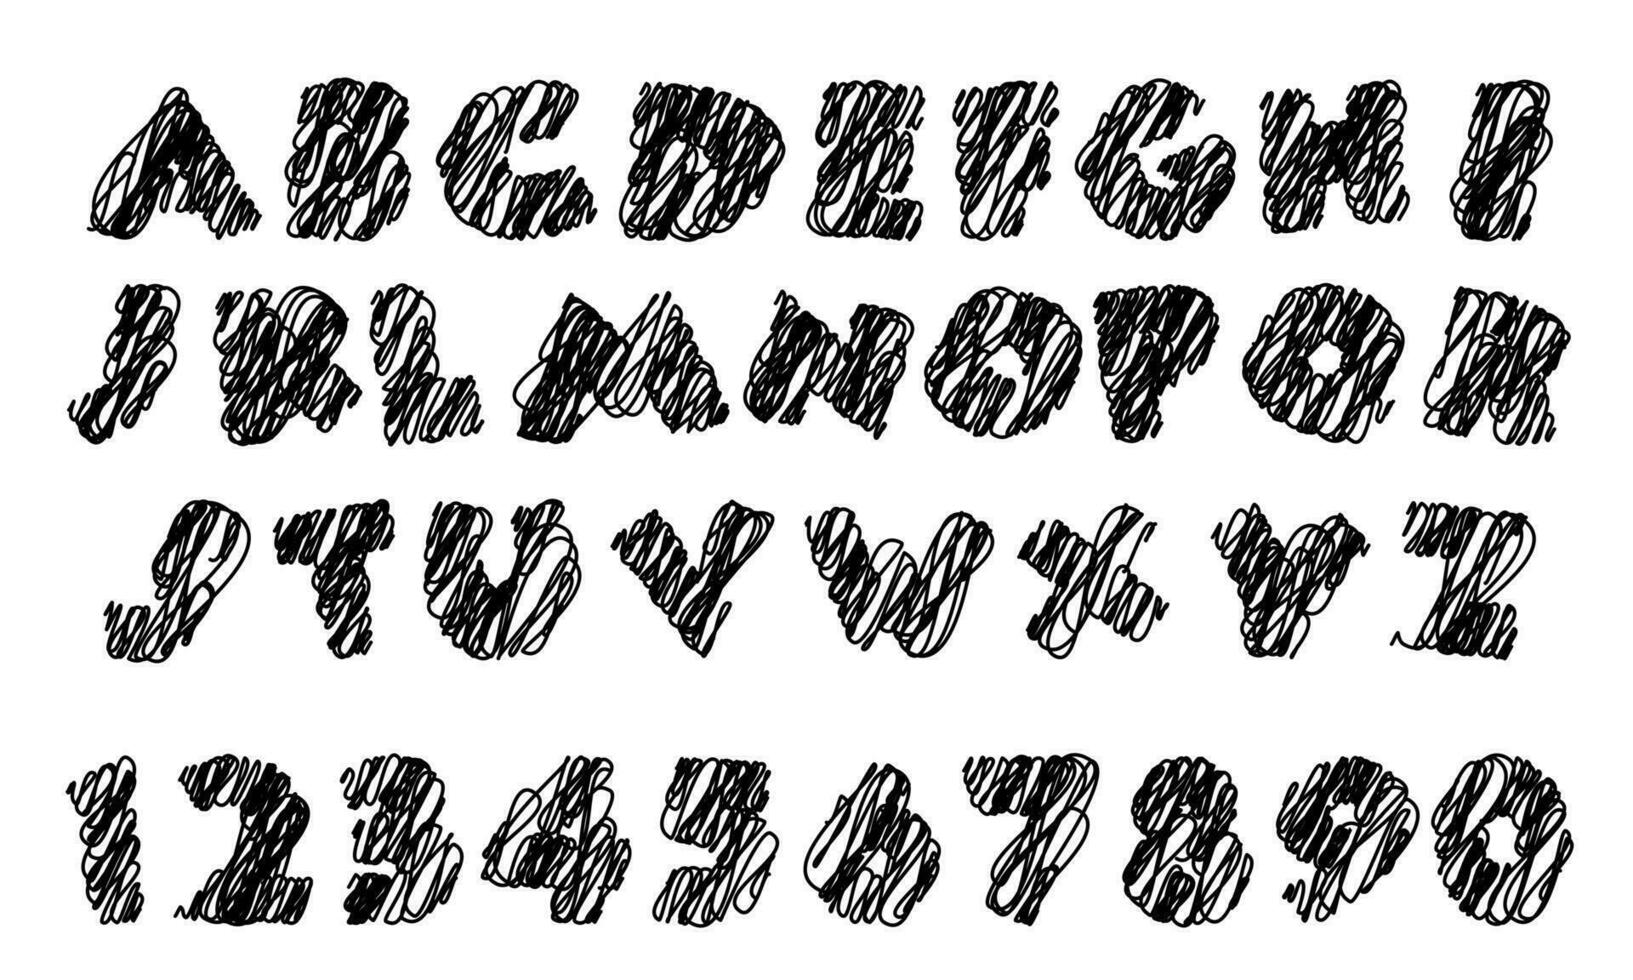 Realistic hand embroidery in alphabetic lettering for decoration and covering. Isolated letters in stitch and fabric design. Dashed font, hand-shaded letters in black threads on a white background vector